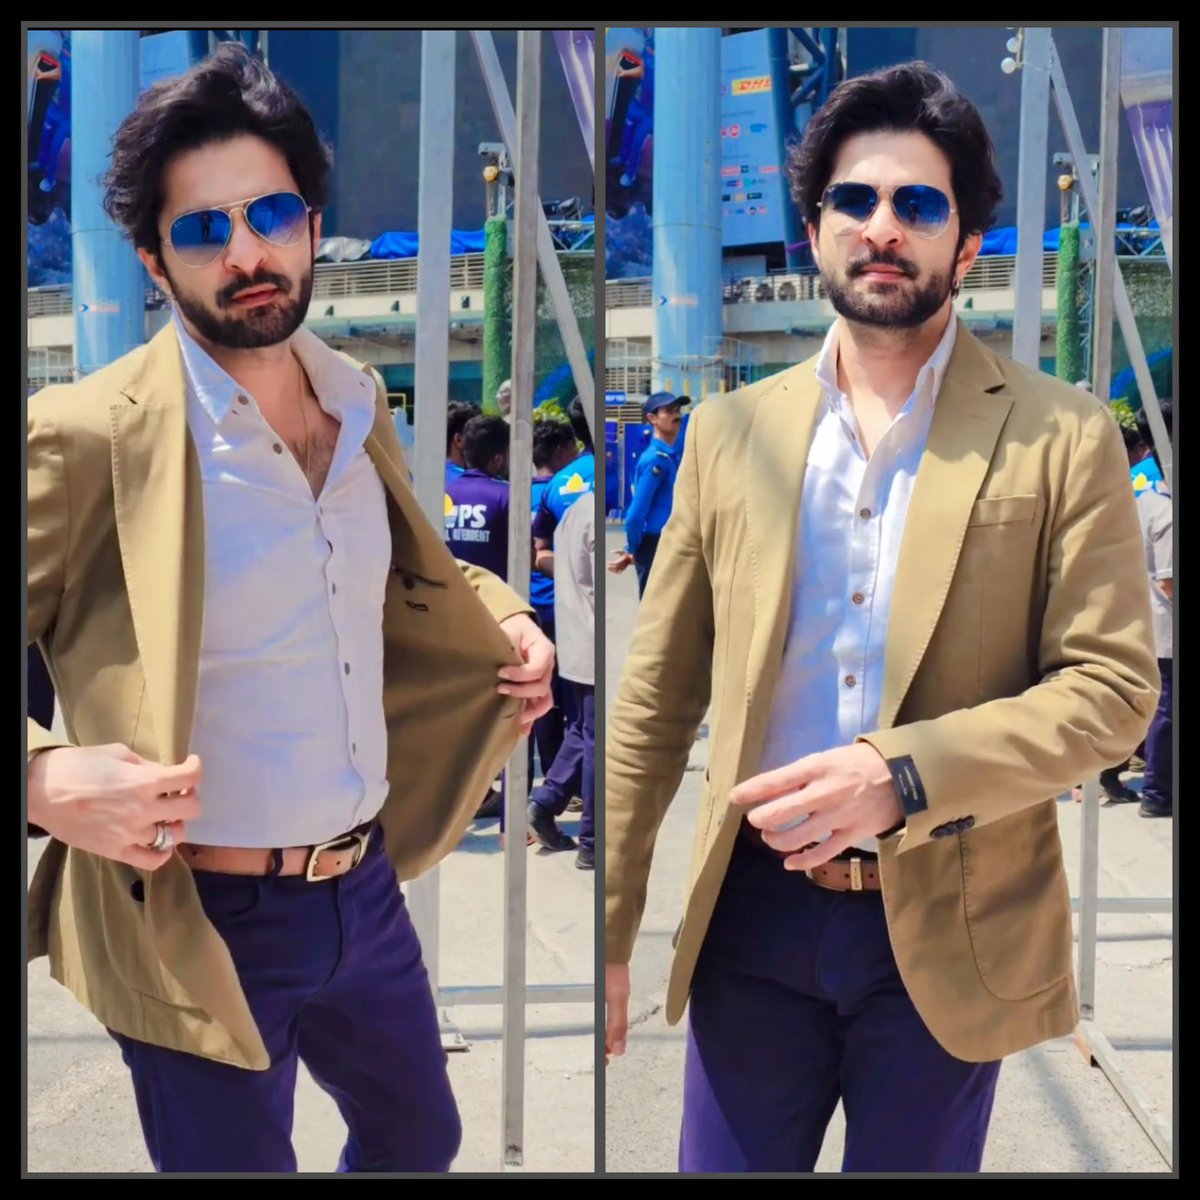 Uffff... He looks so so fine... He is aging like wine... ❤❤😍😍

Can remember the song, chain churai meri kisne, tune🤭

Lovely Mr Bapat... 

#RaqeshBapat

Thank u @jyothixraq for sending this, just made my day better...